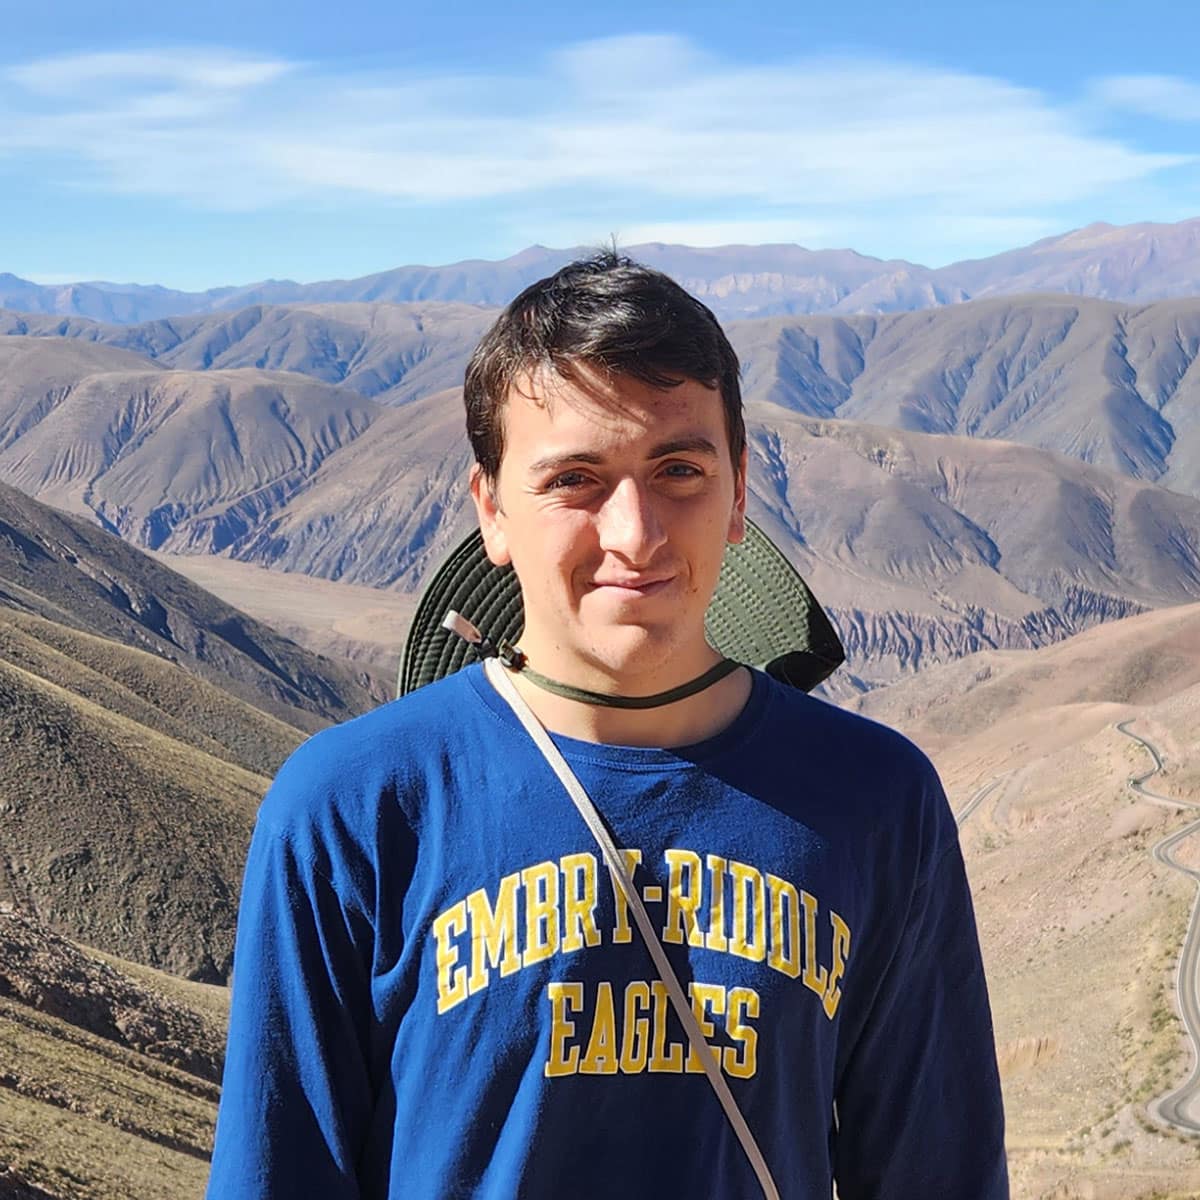 With his eyes on a career in Unmanned Systems, Zackrey Schraeder is making the most of the head start provided by Dual Enrollment at Embry-Riddle.